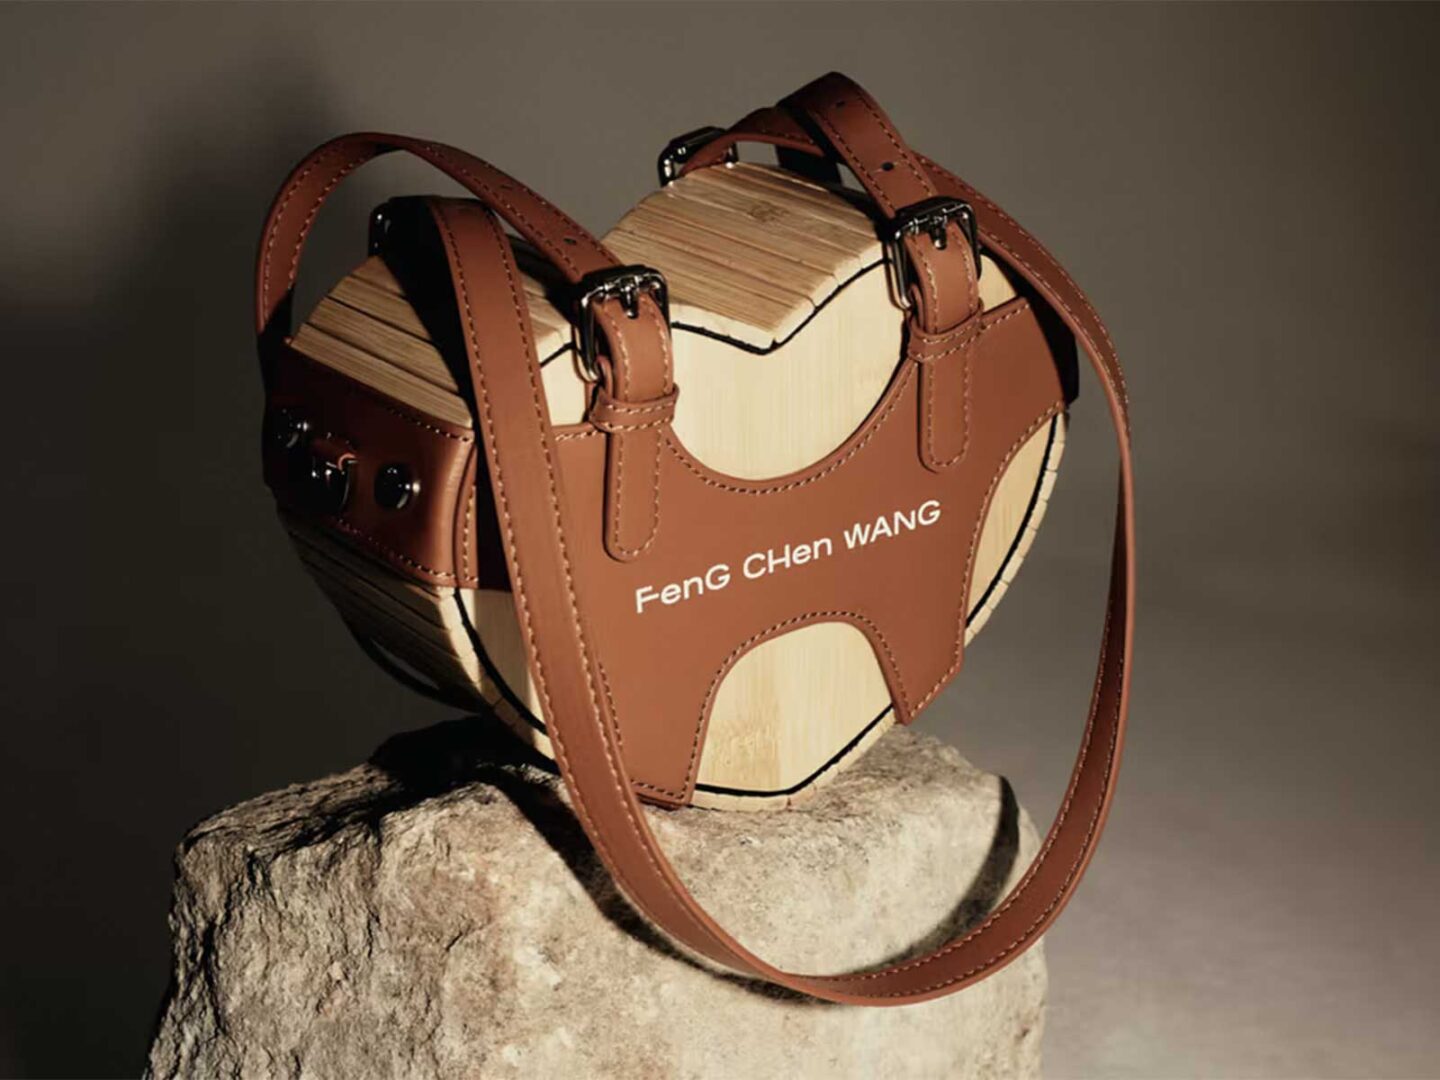 Feng Chen Wang’s new Bamboo bag comes in the shape of a heart